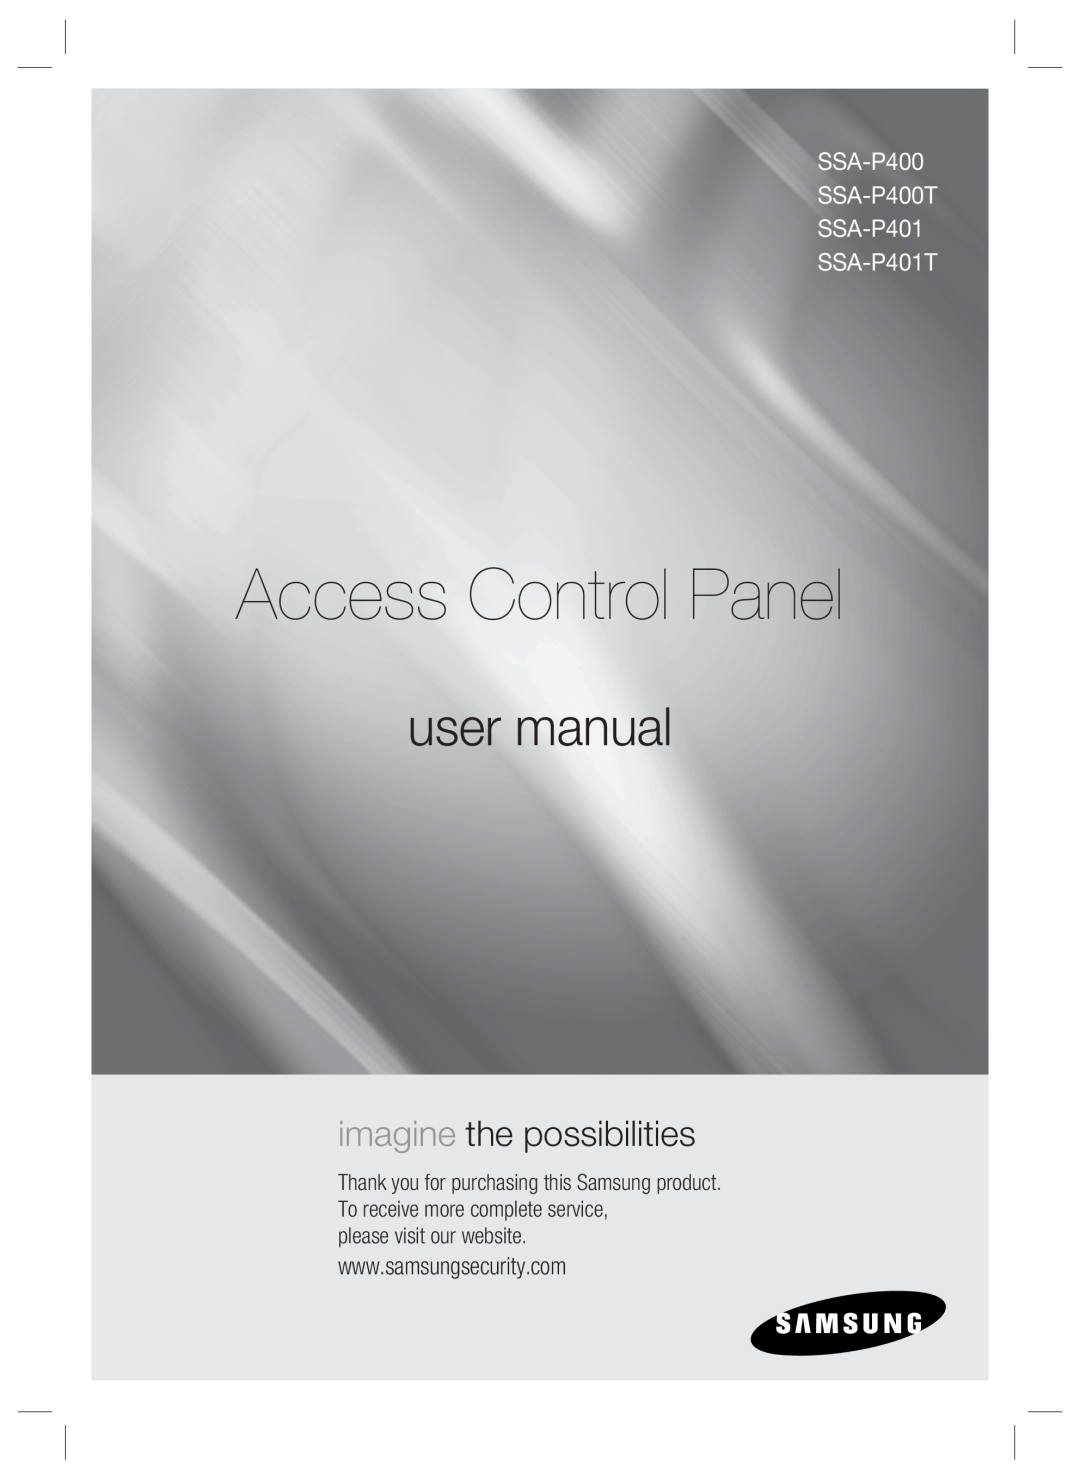 Samsung SSA-P401T, SSA-P400T user manual please visit our website, Access Control Panel, imagine the possibilities 